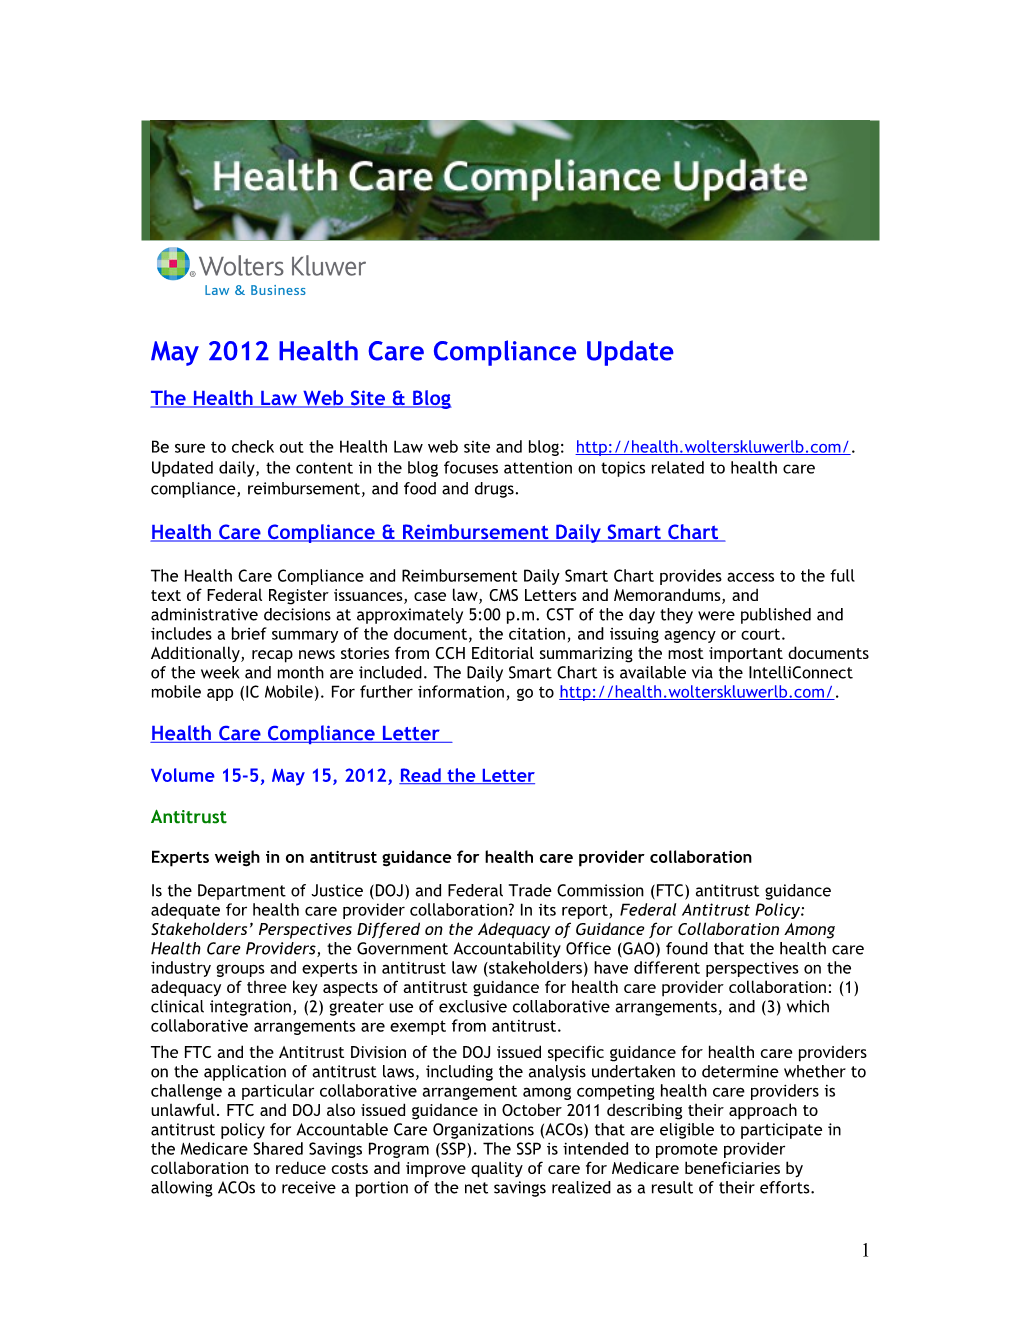 The Health Law Web Site & Blog